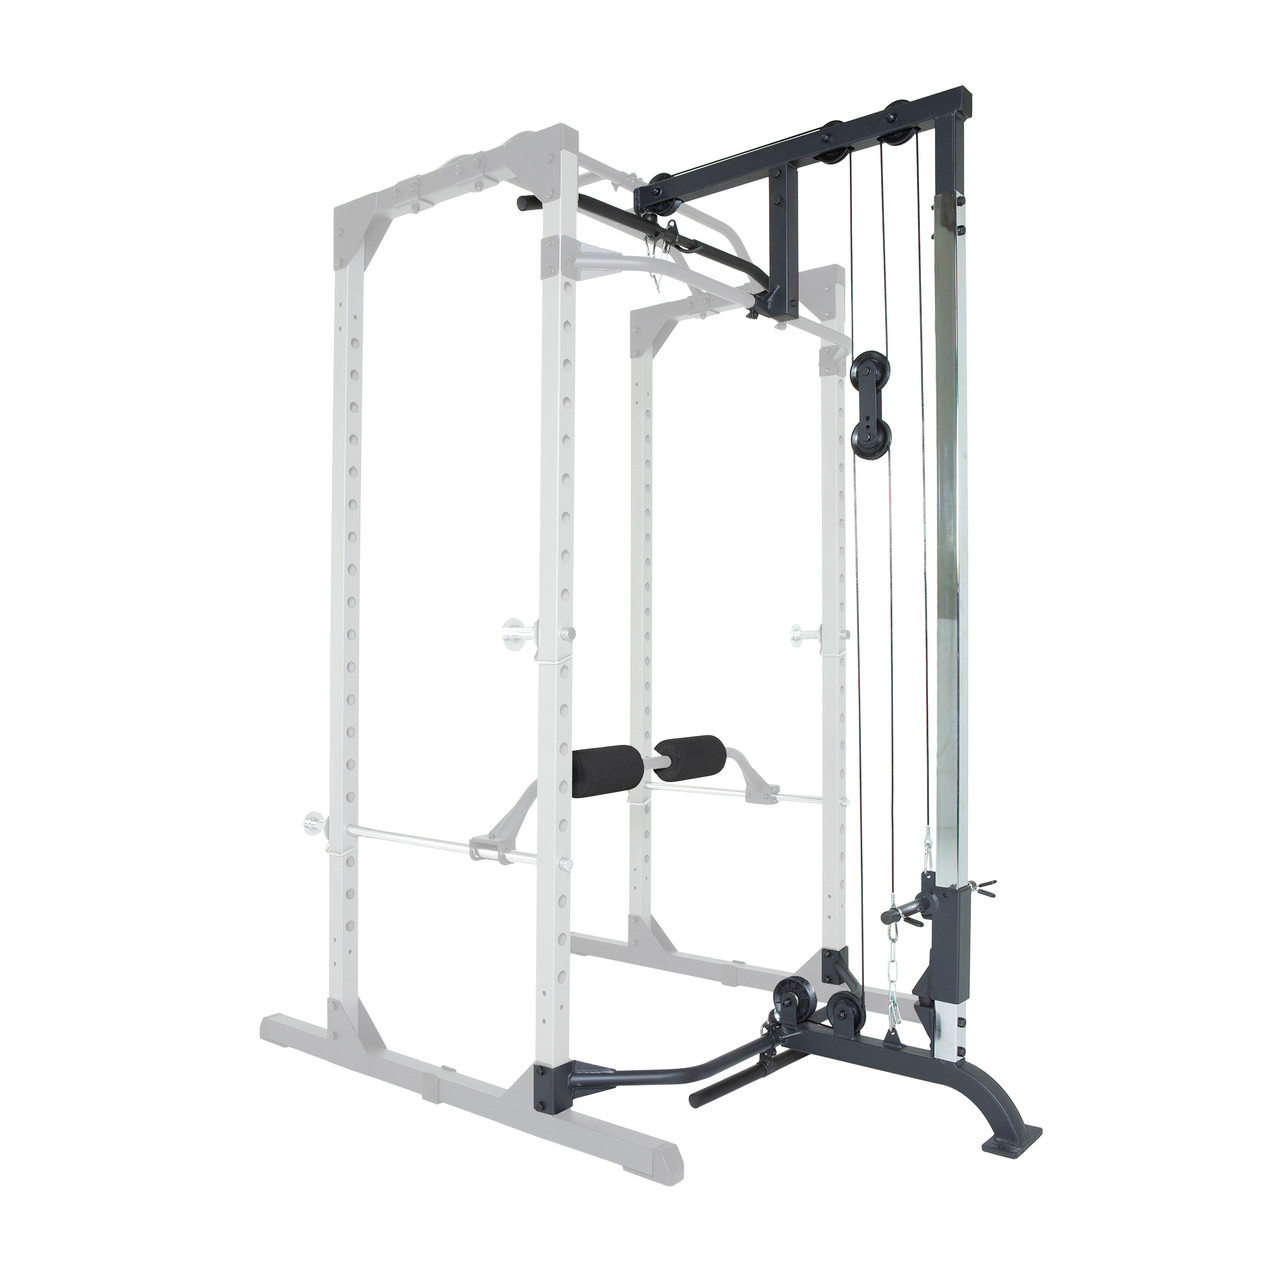 FITNESS REALITY 710 Olympic Lat Pull Down and Low Row Cable